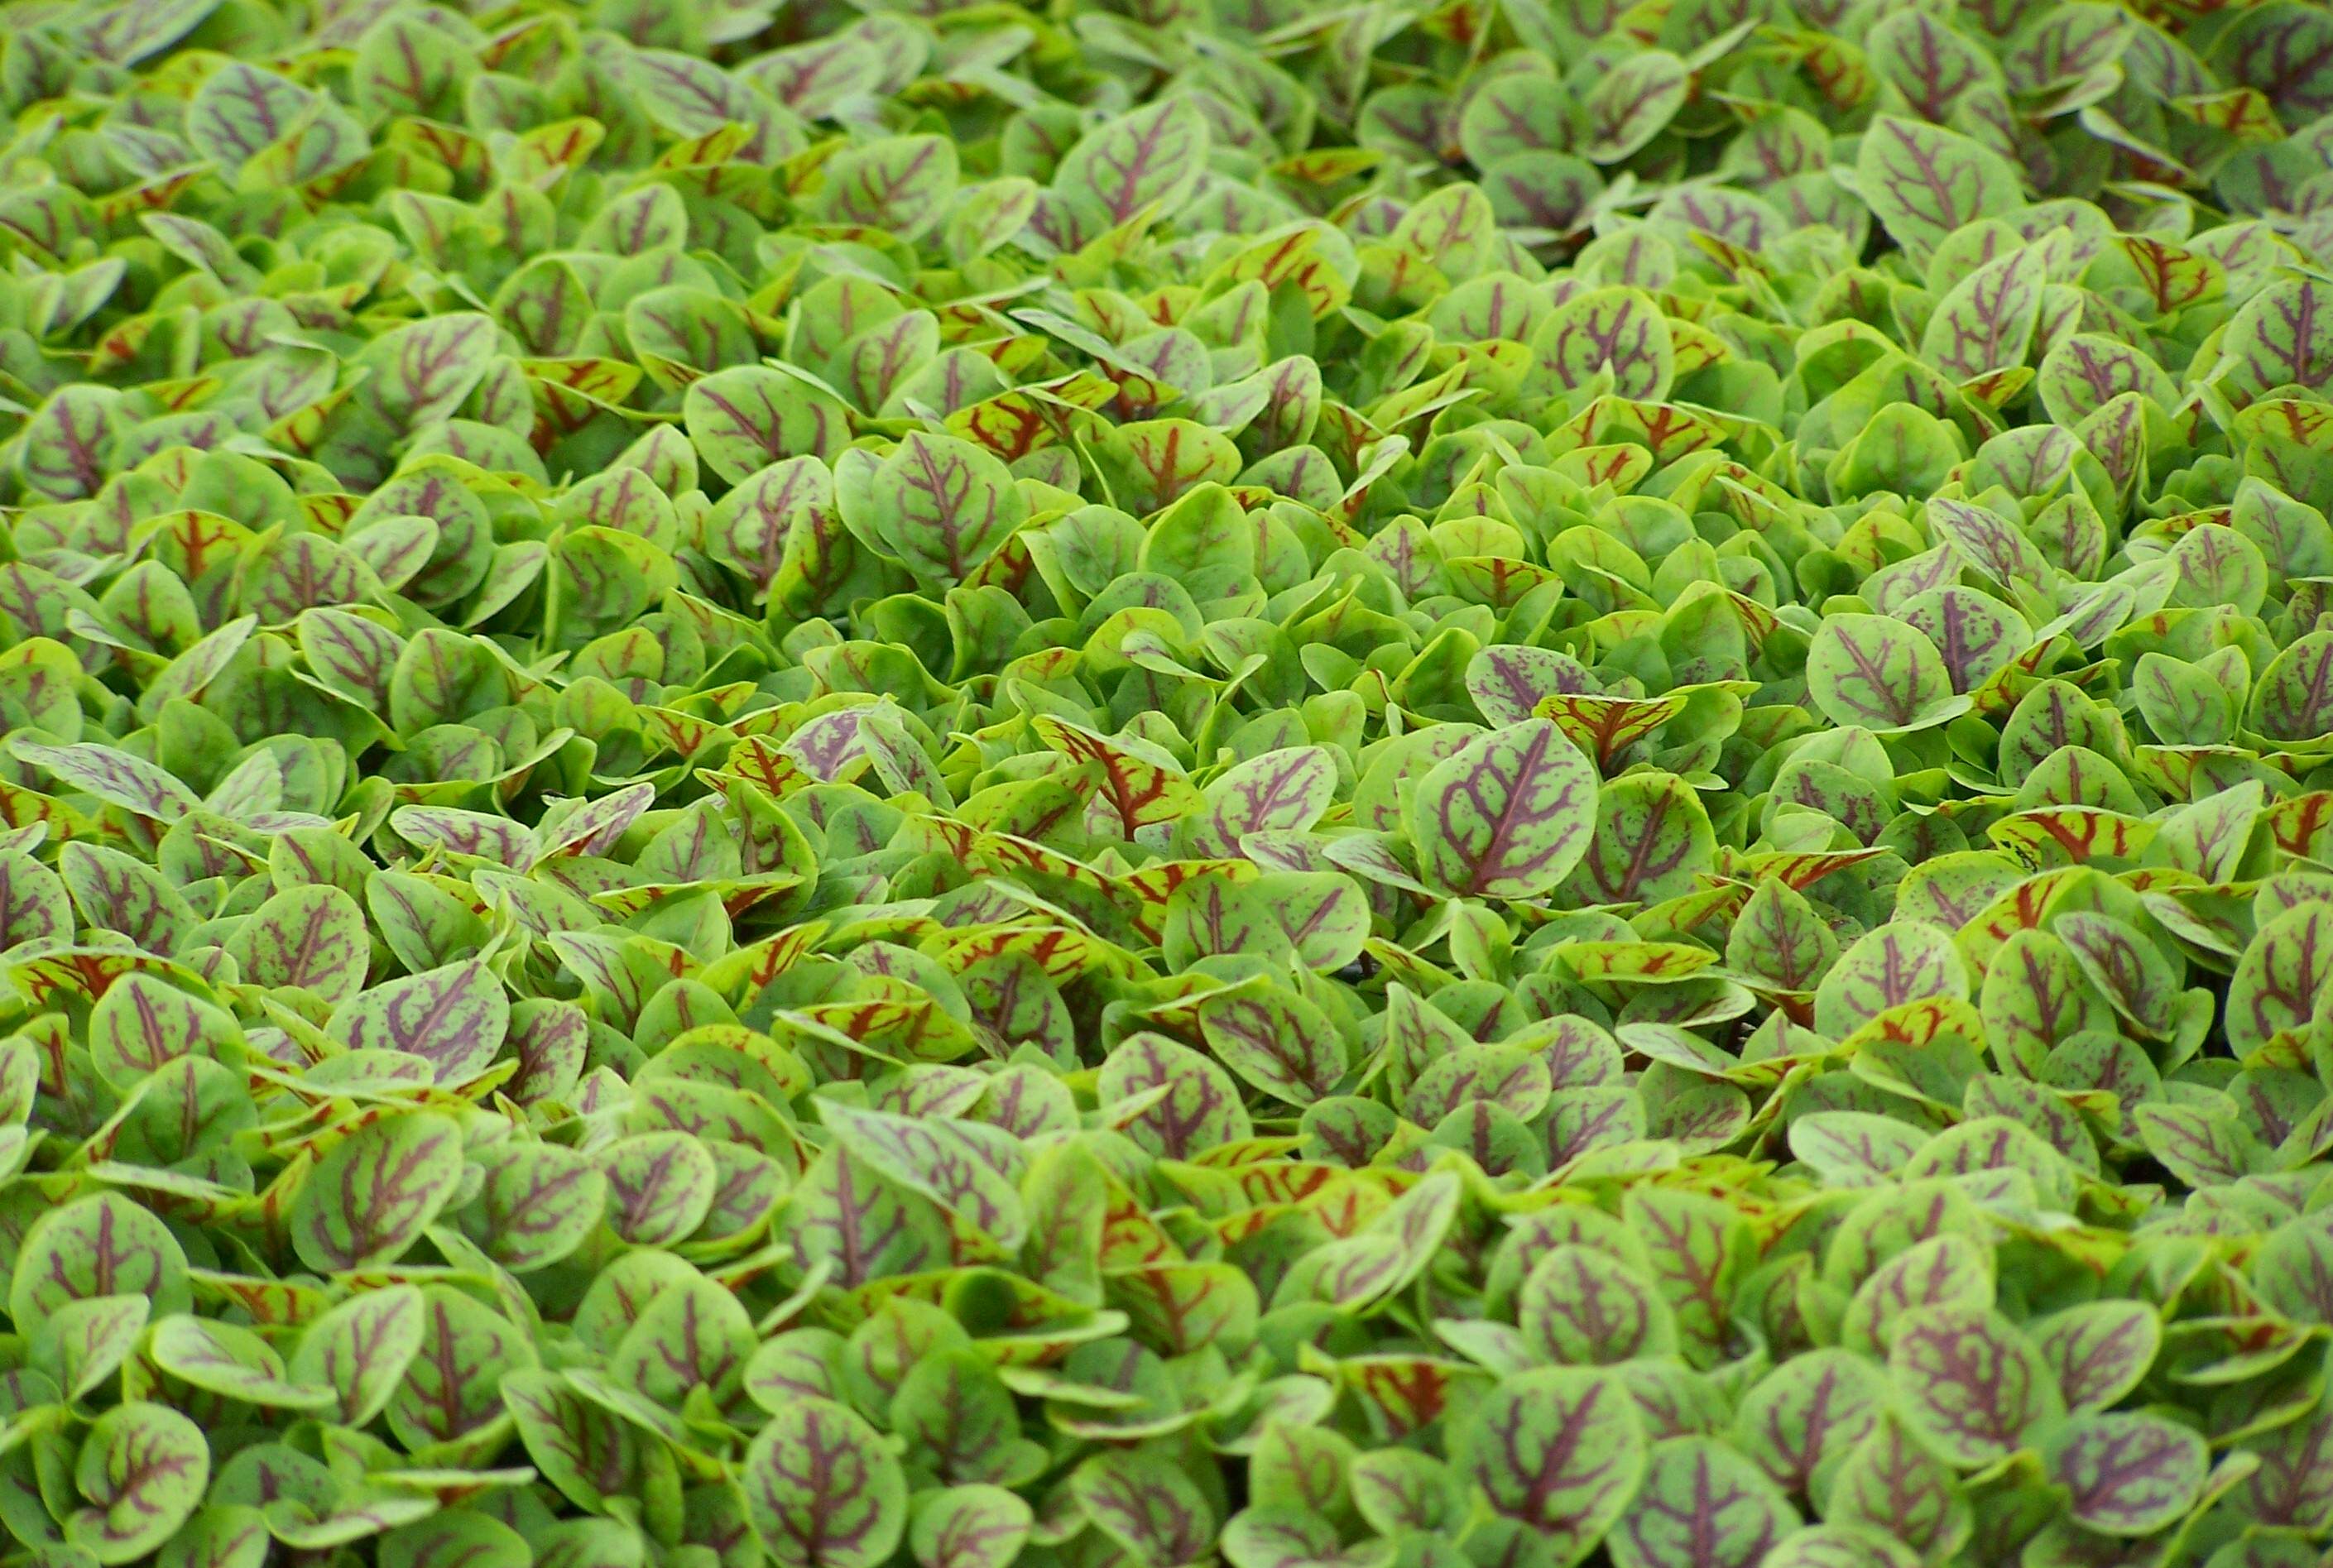 Wild sorrel from Blue Moon Acres